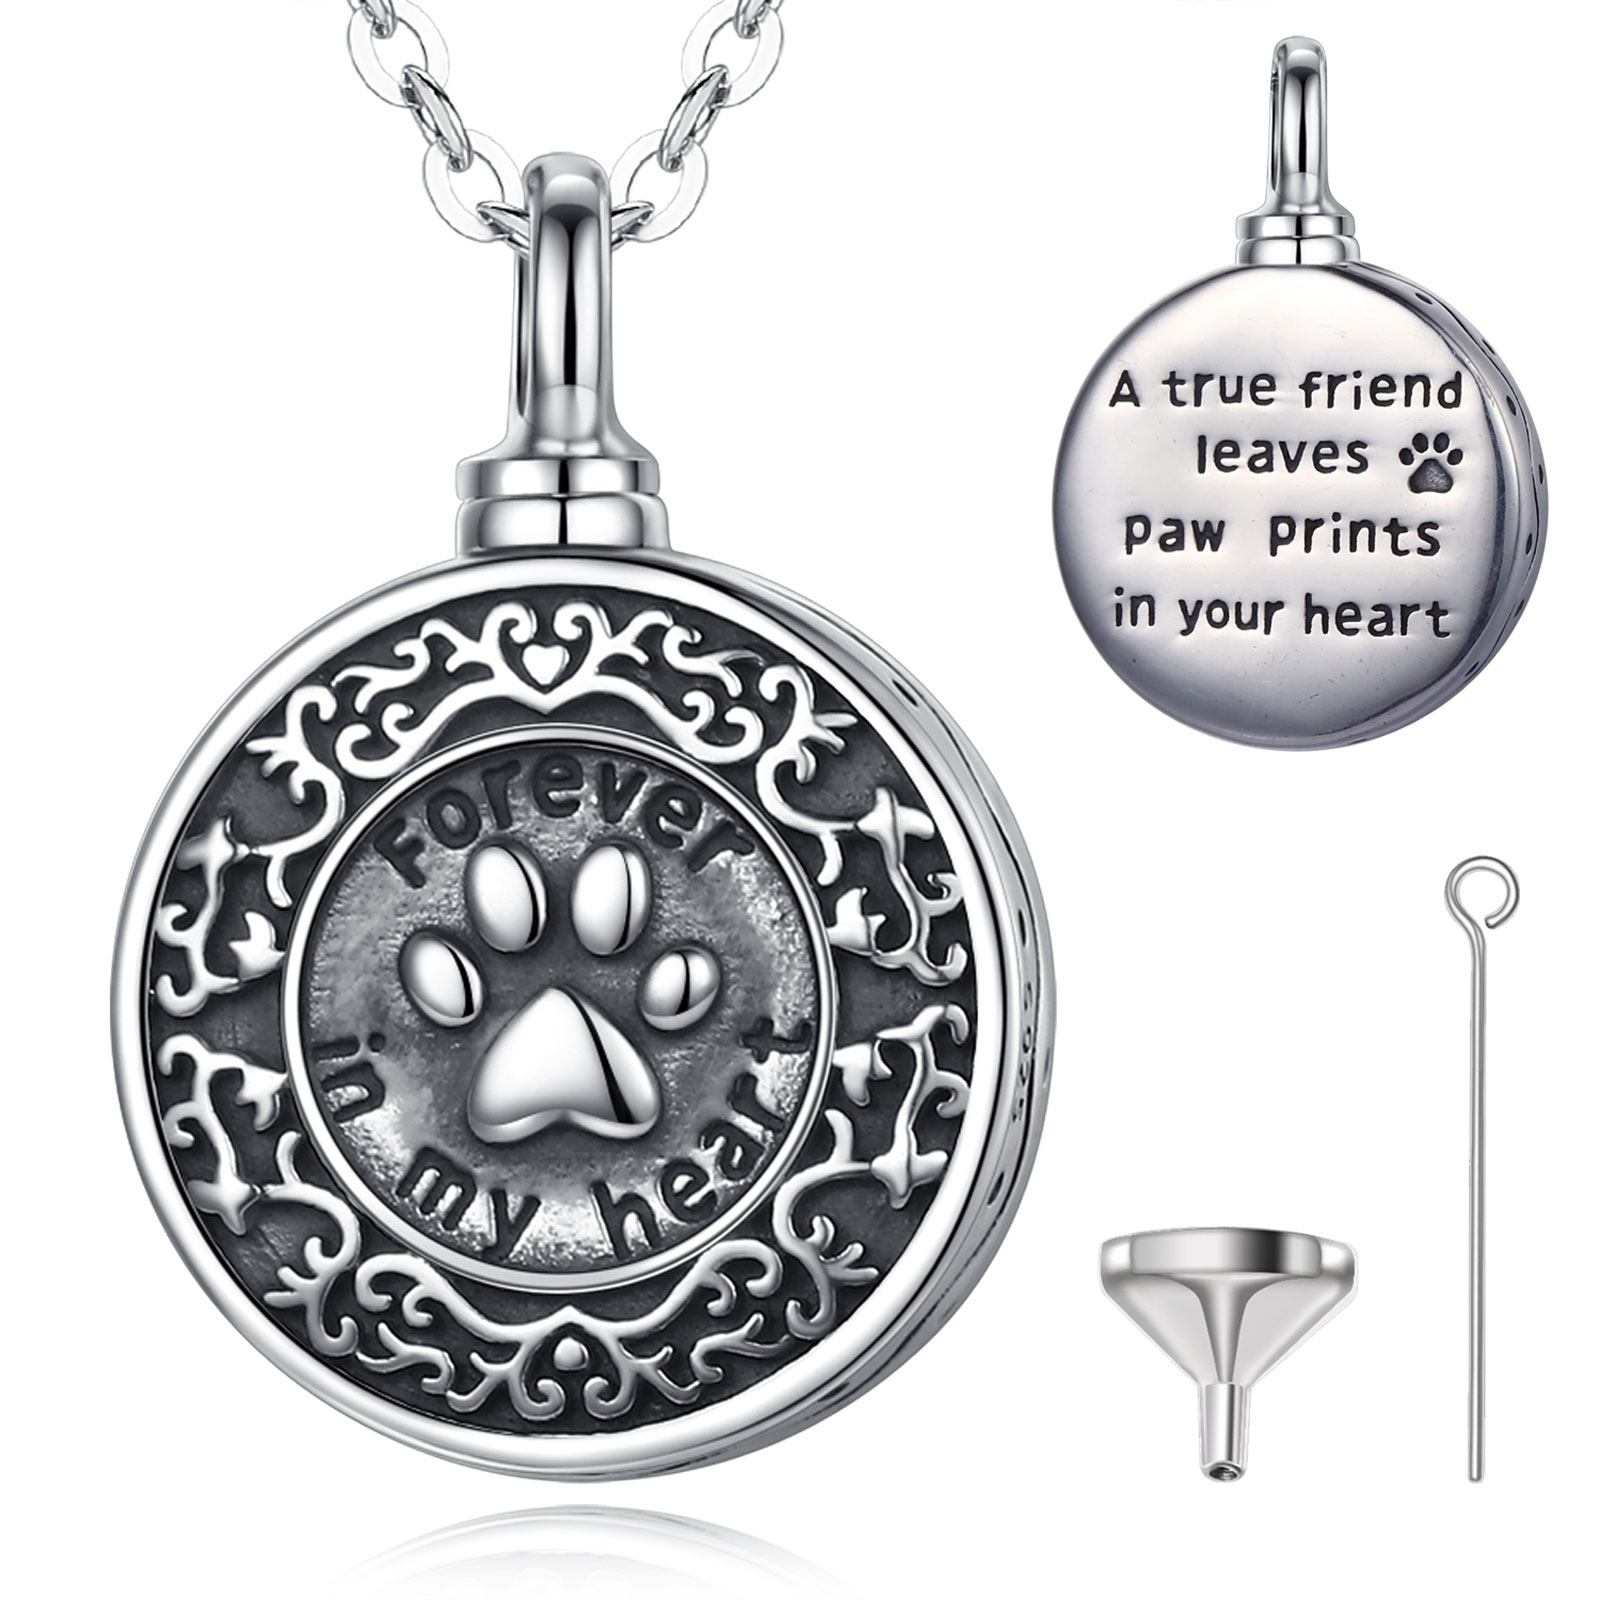 Merryshine animal paw s925 sterling silver pet memorial cremation jewelry pendant necklace